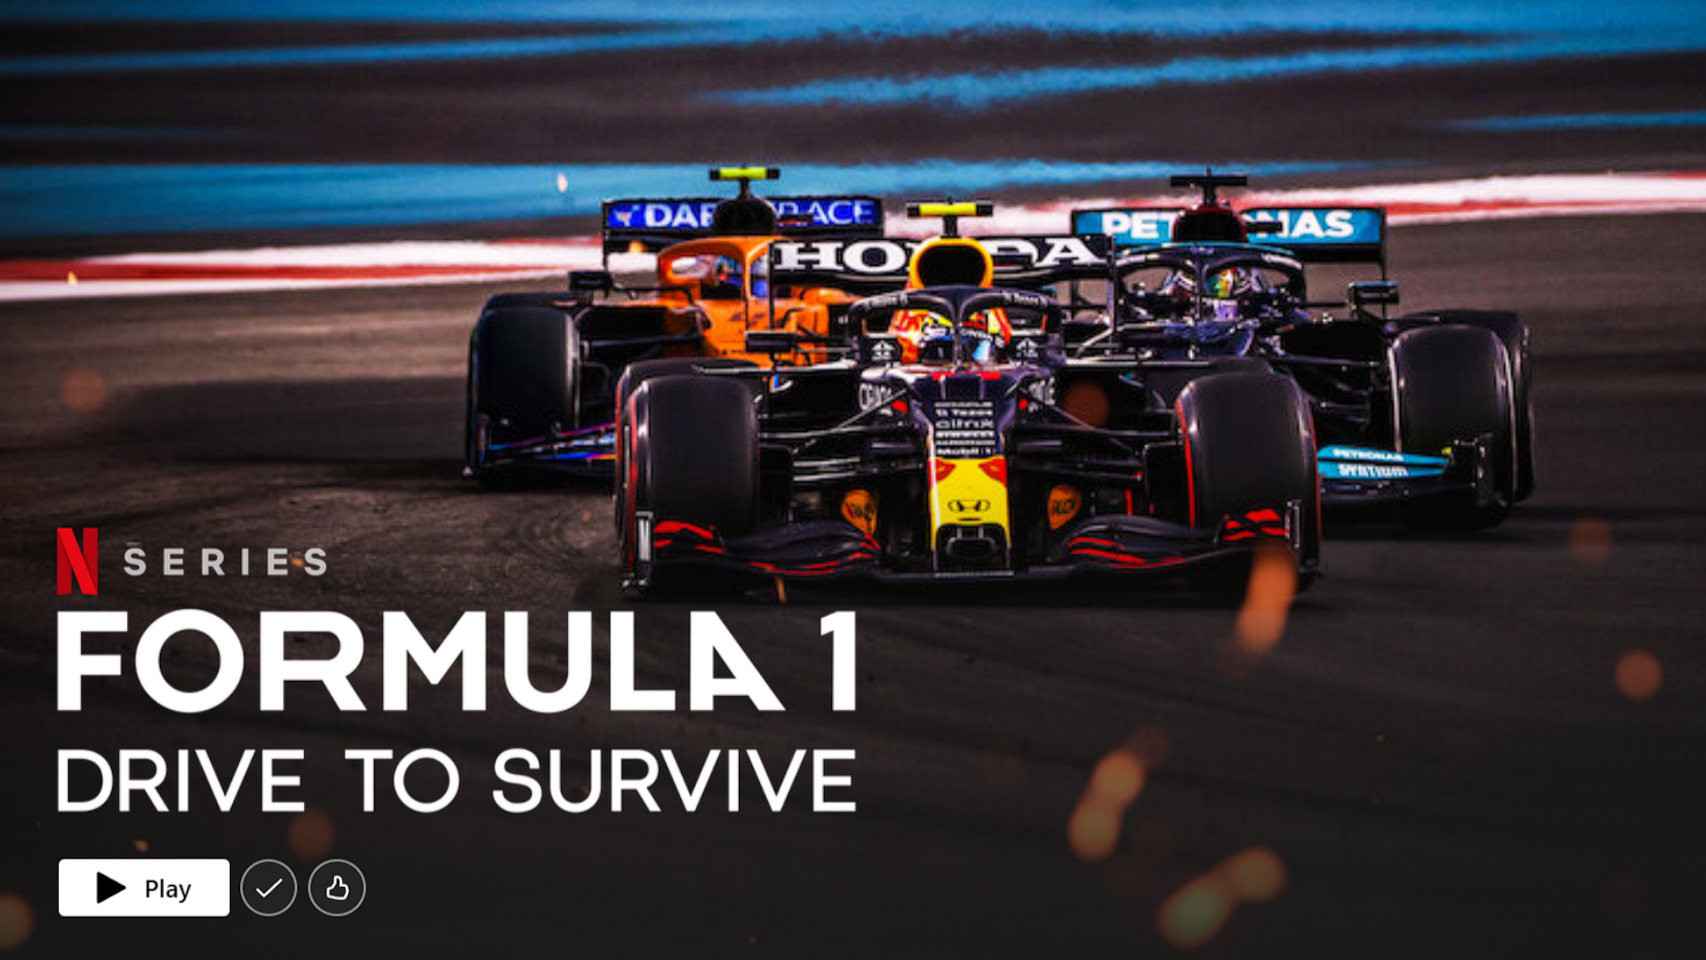 Netflix already has a sports docuseries, Drive to Survive, based on Formula 1